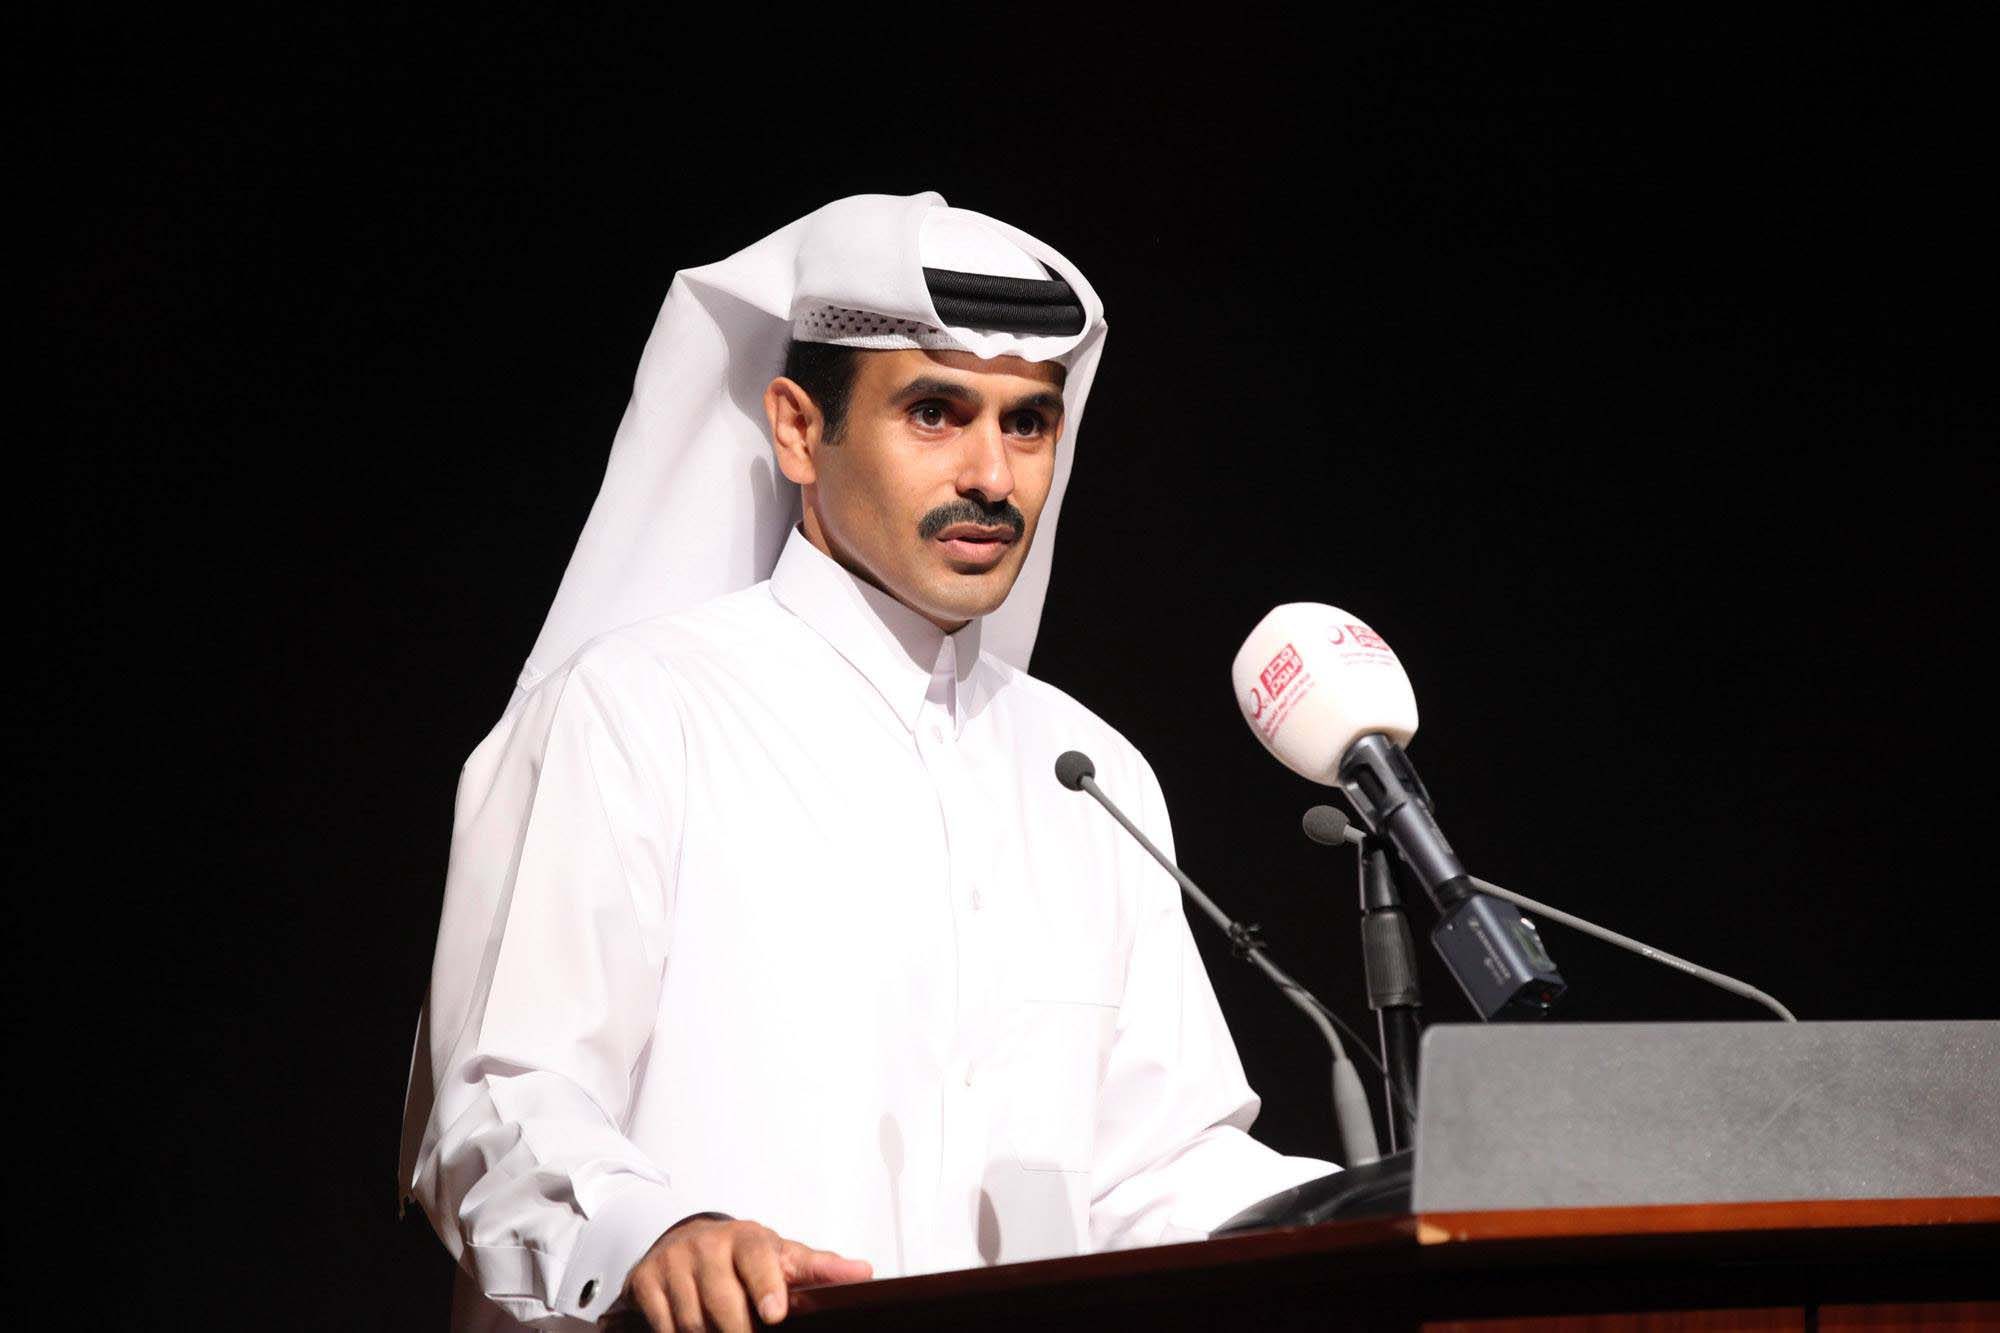 Qatar’s energy minister aligns Qatarization plan with National Vision for human development